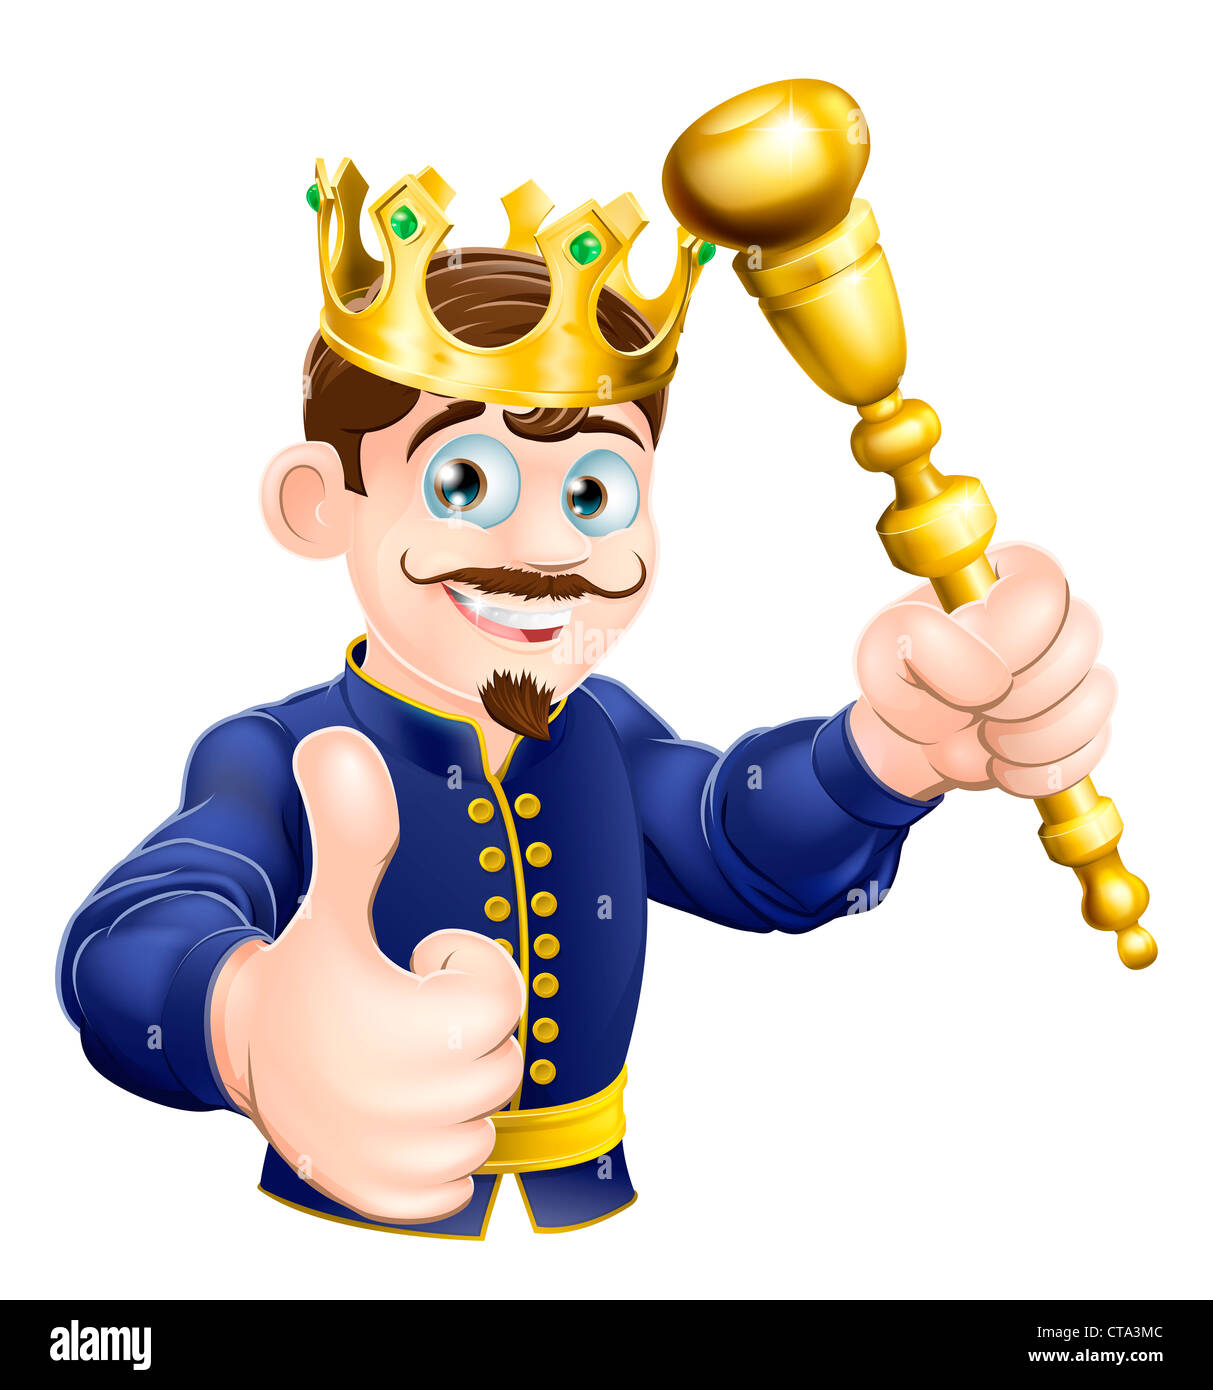 Illustration of a happy cartoon king holding a gold sceptre Stock Photo